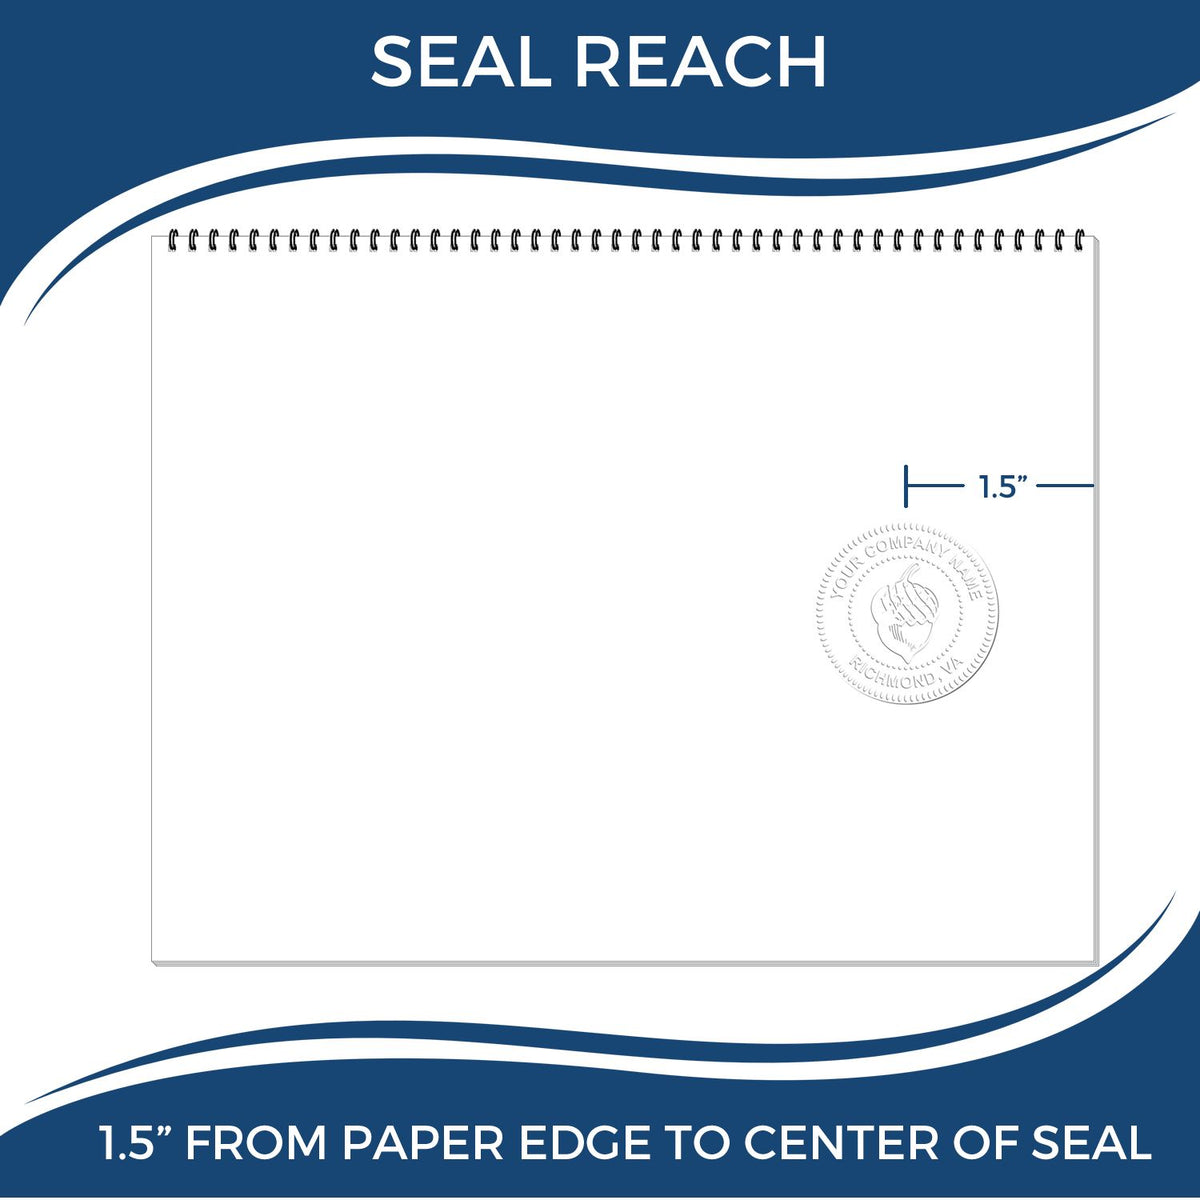 An infographic showing the seal reach which is represented by a ruler and a miniature seal image of the Gift Massachusetts Geologist Seal